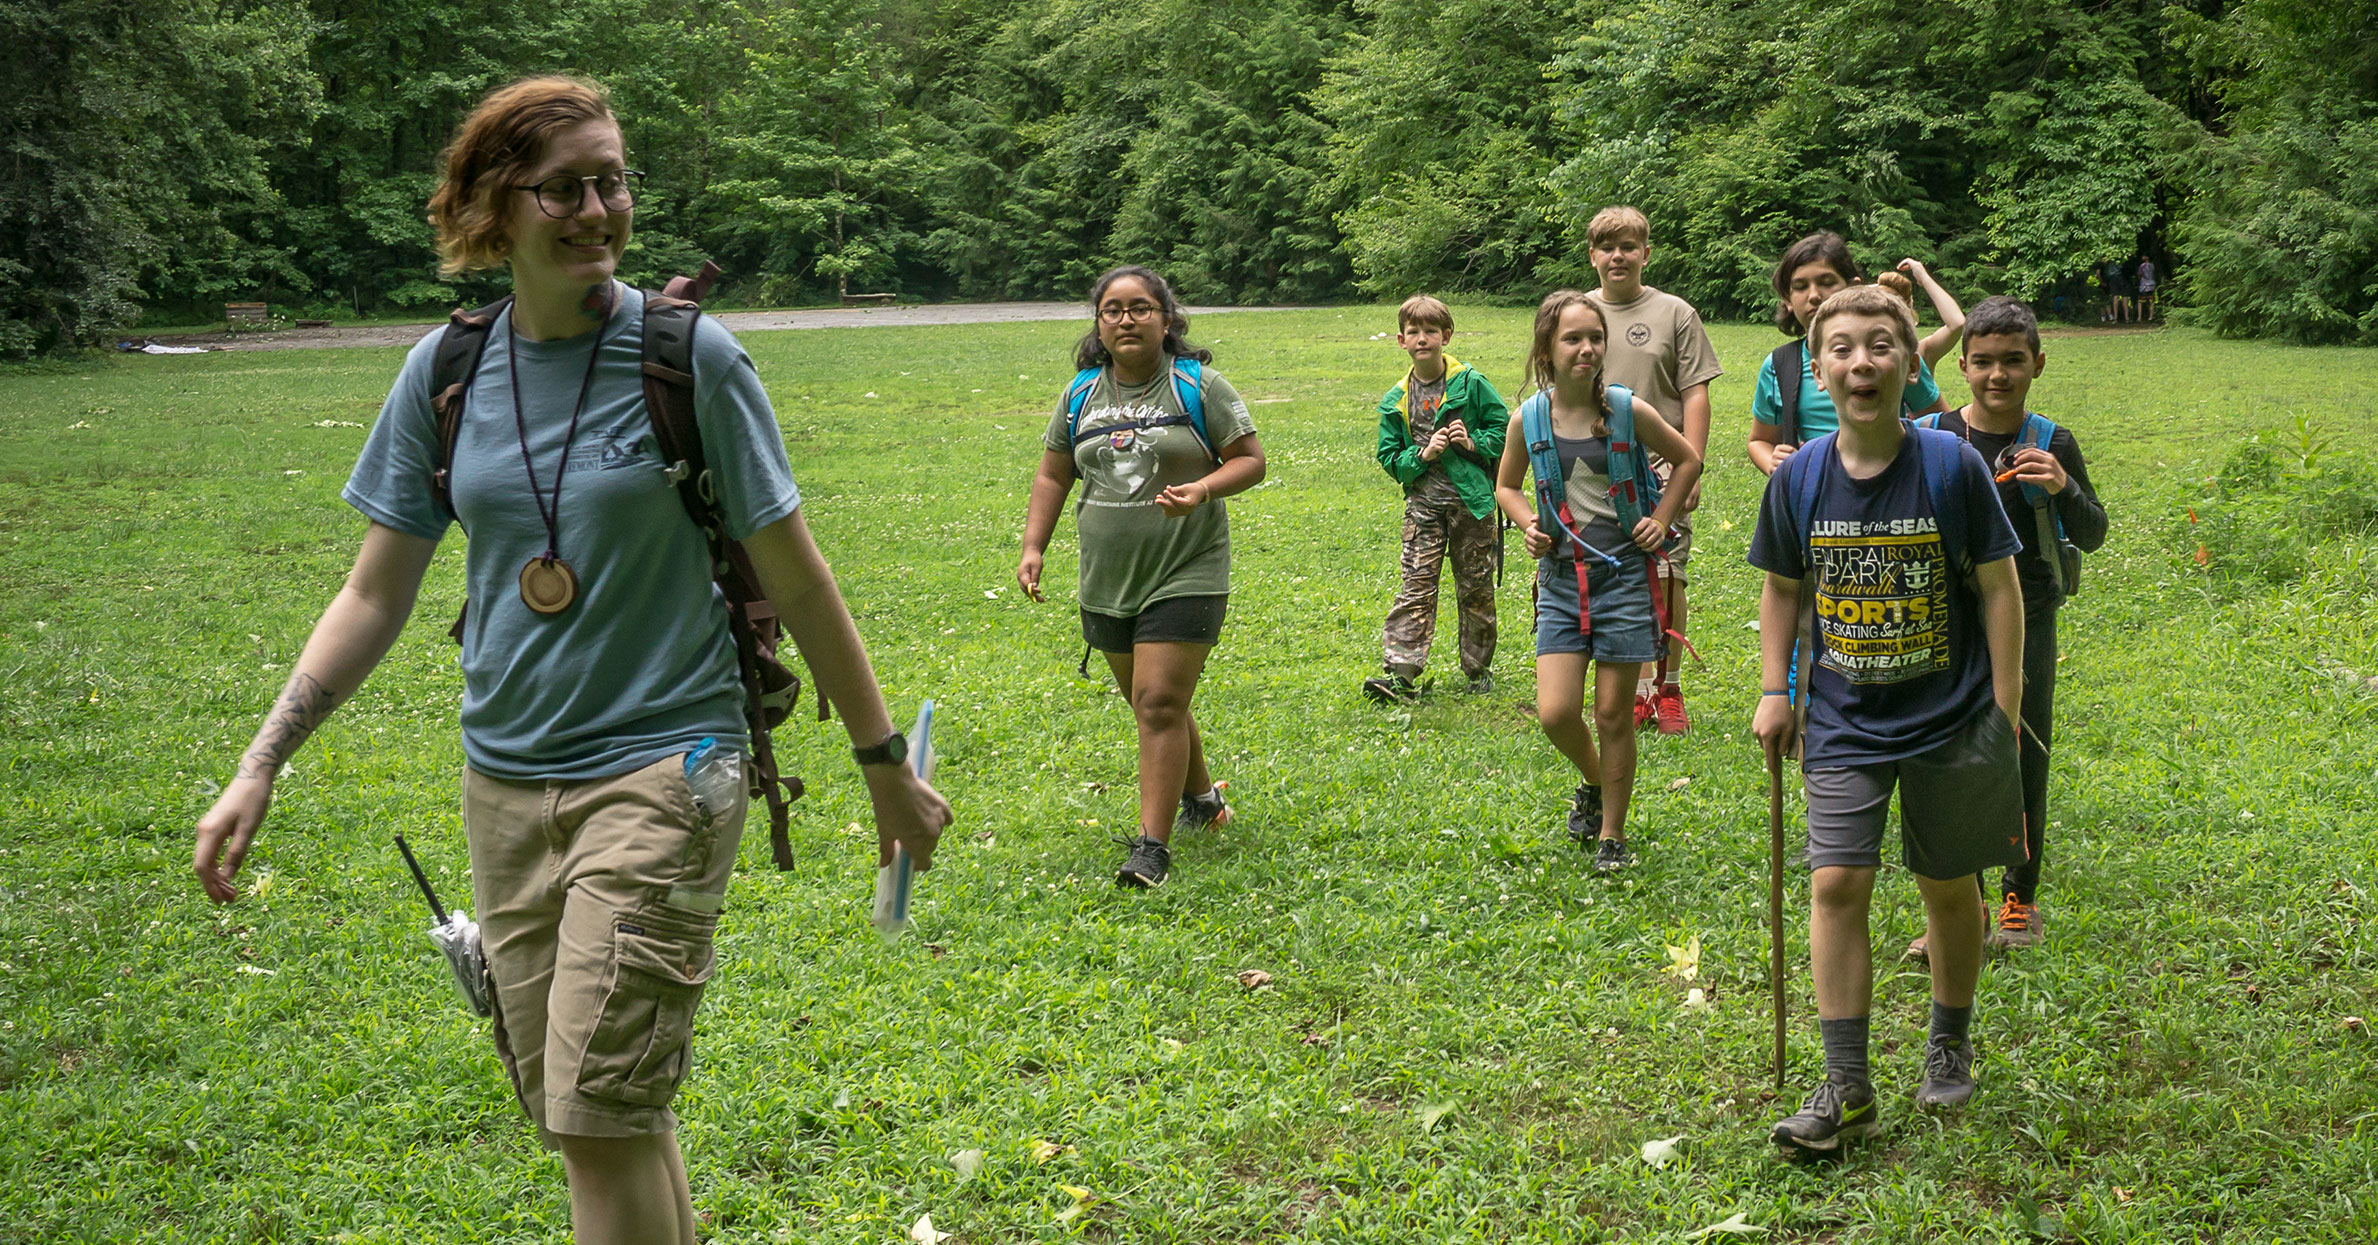 A teacher naturalist leads a group of summer campers